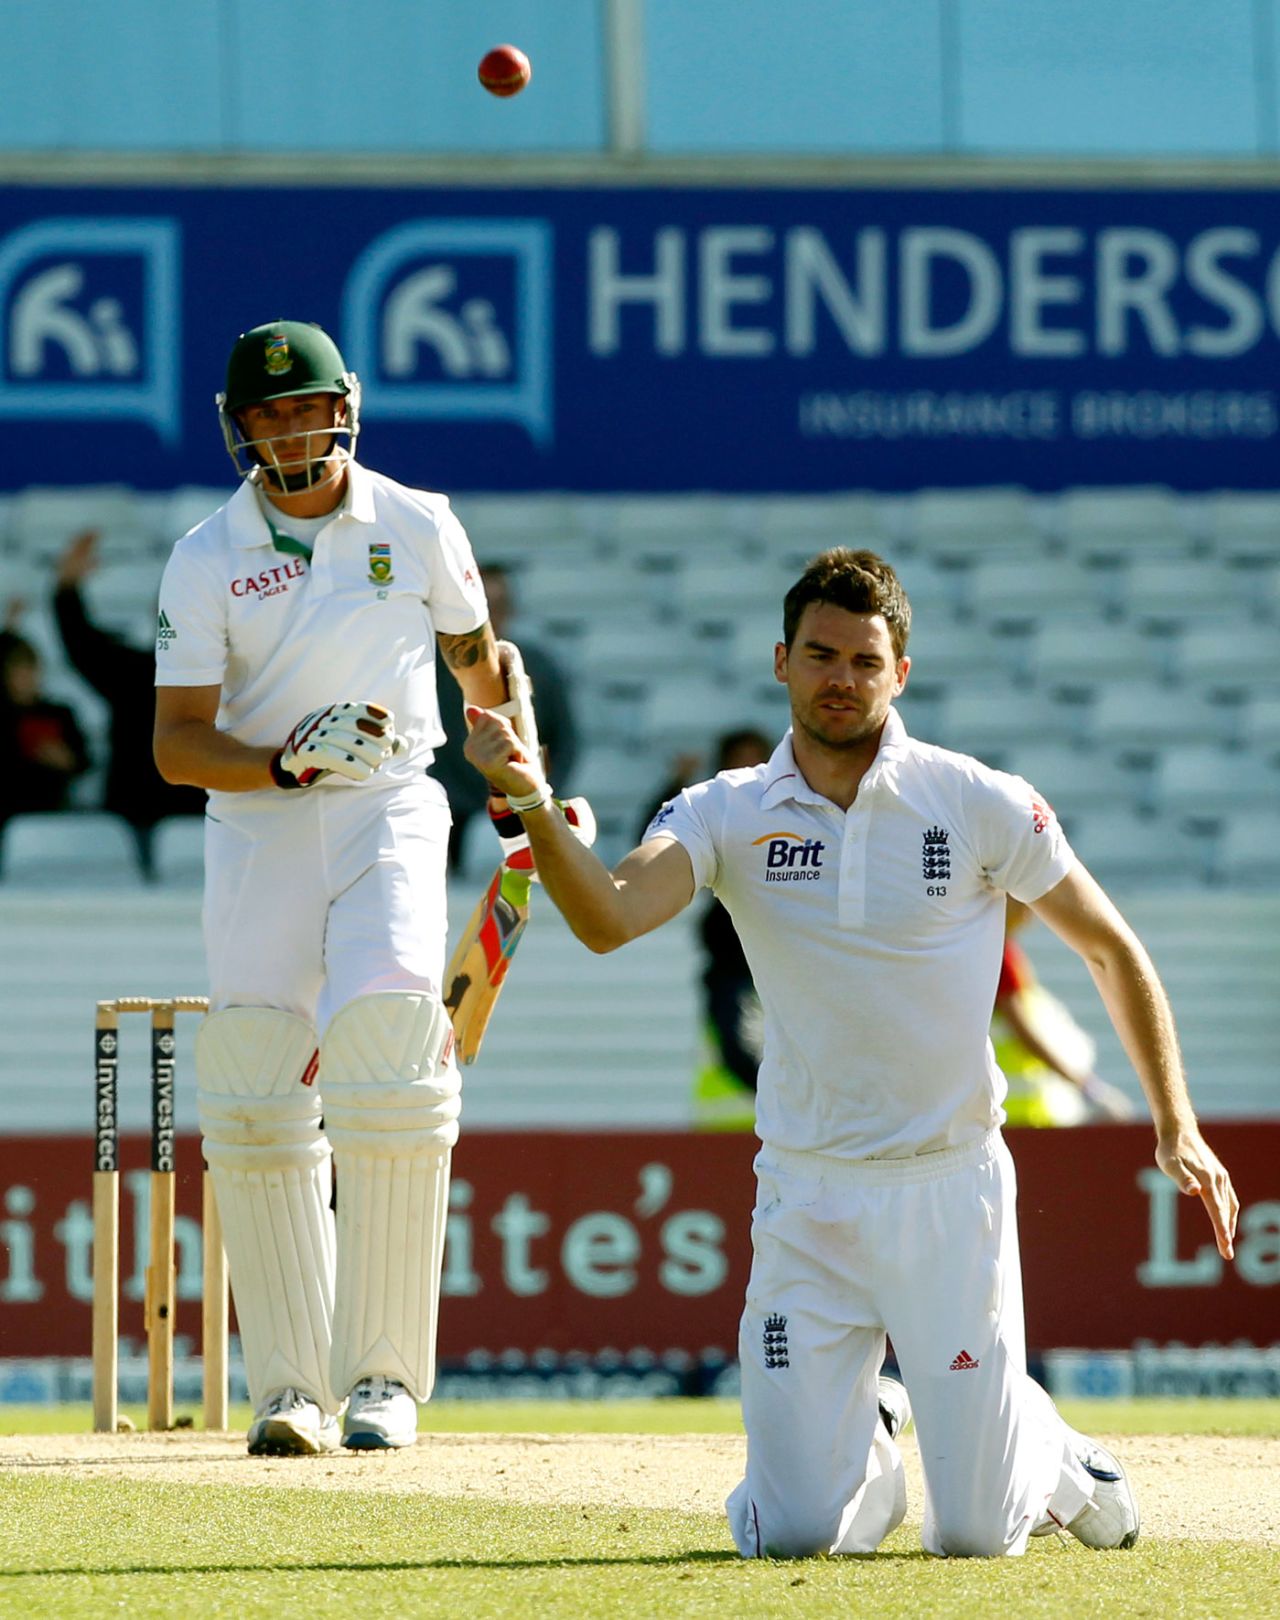 James Anderson caught Dale Steyn off his own bowling, England v South Africa, 2nd Investec Test, Headingley, 5th day, August 6, 2012